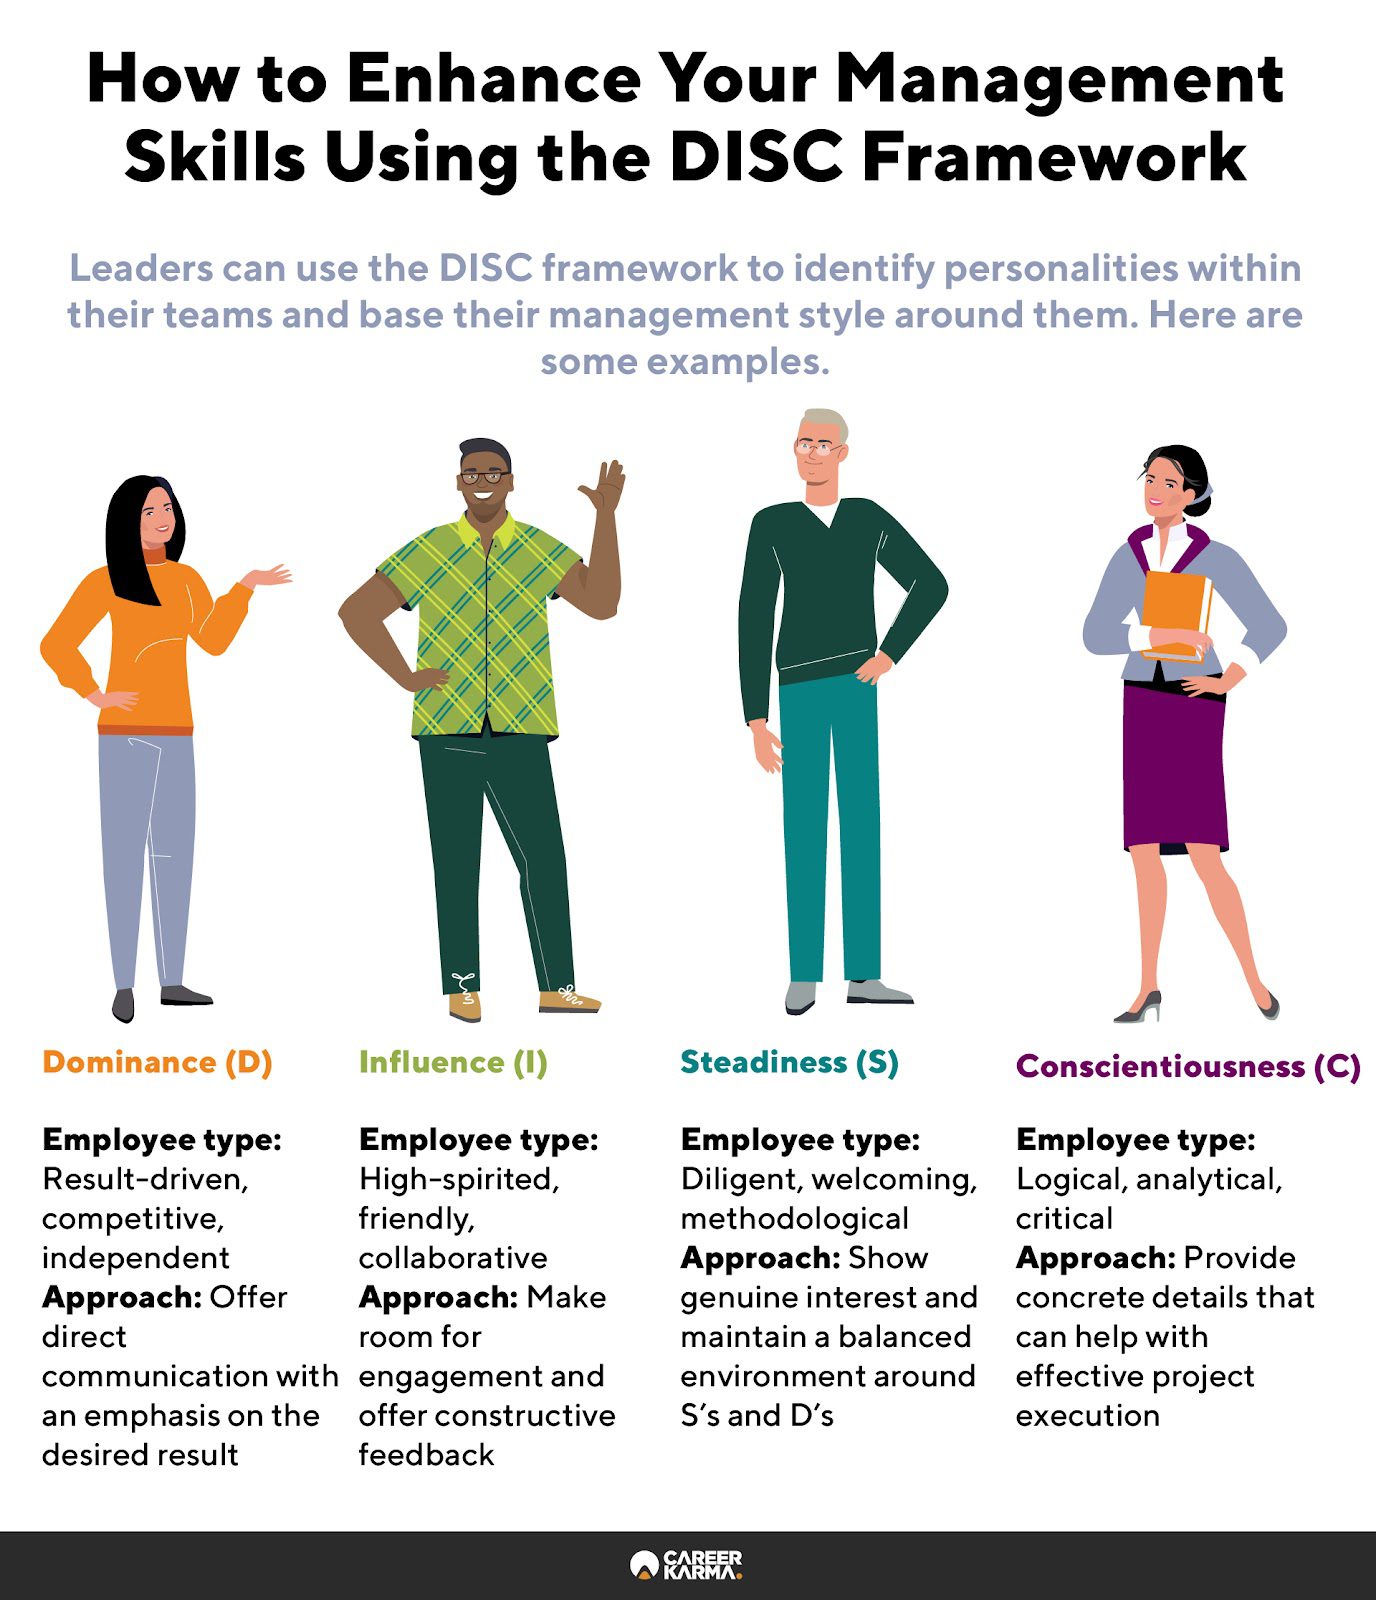 An infographic showing an overview of the DISC model